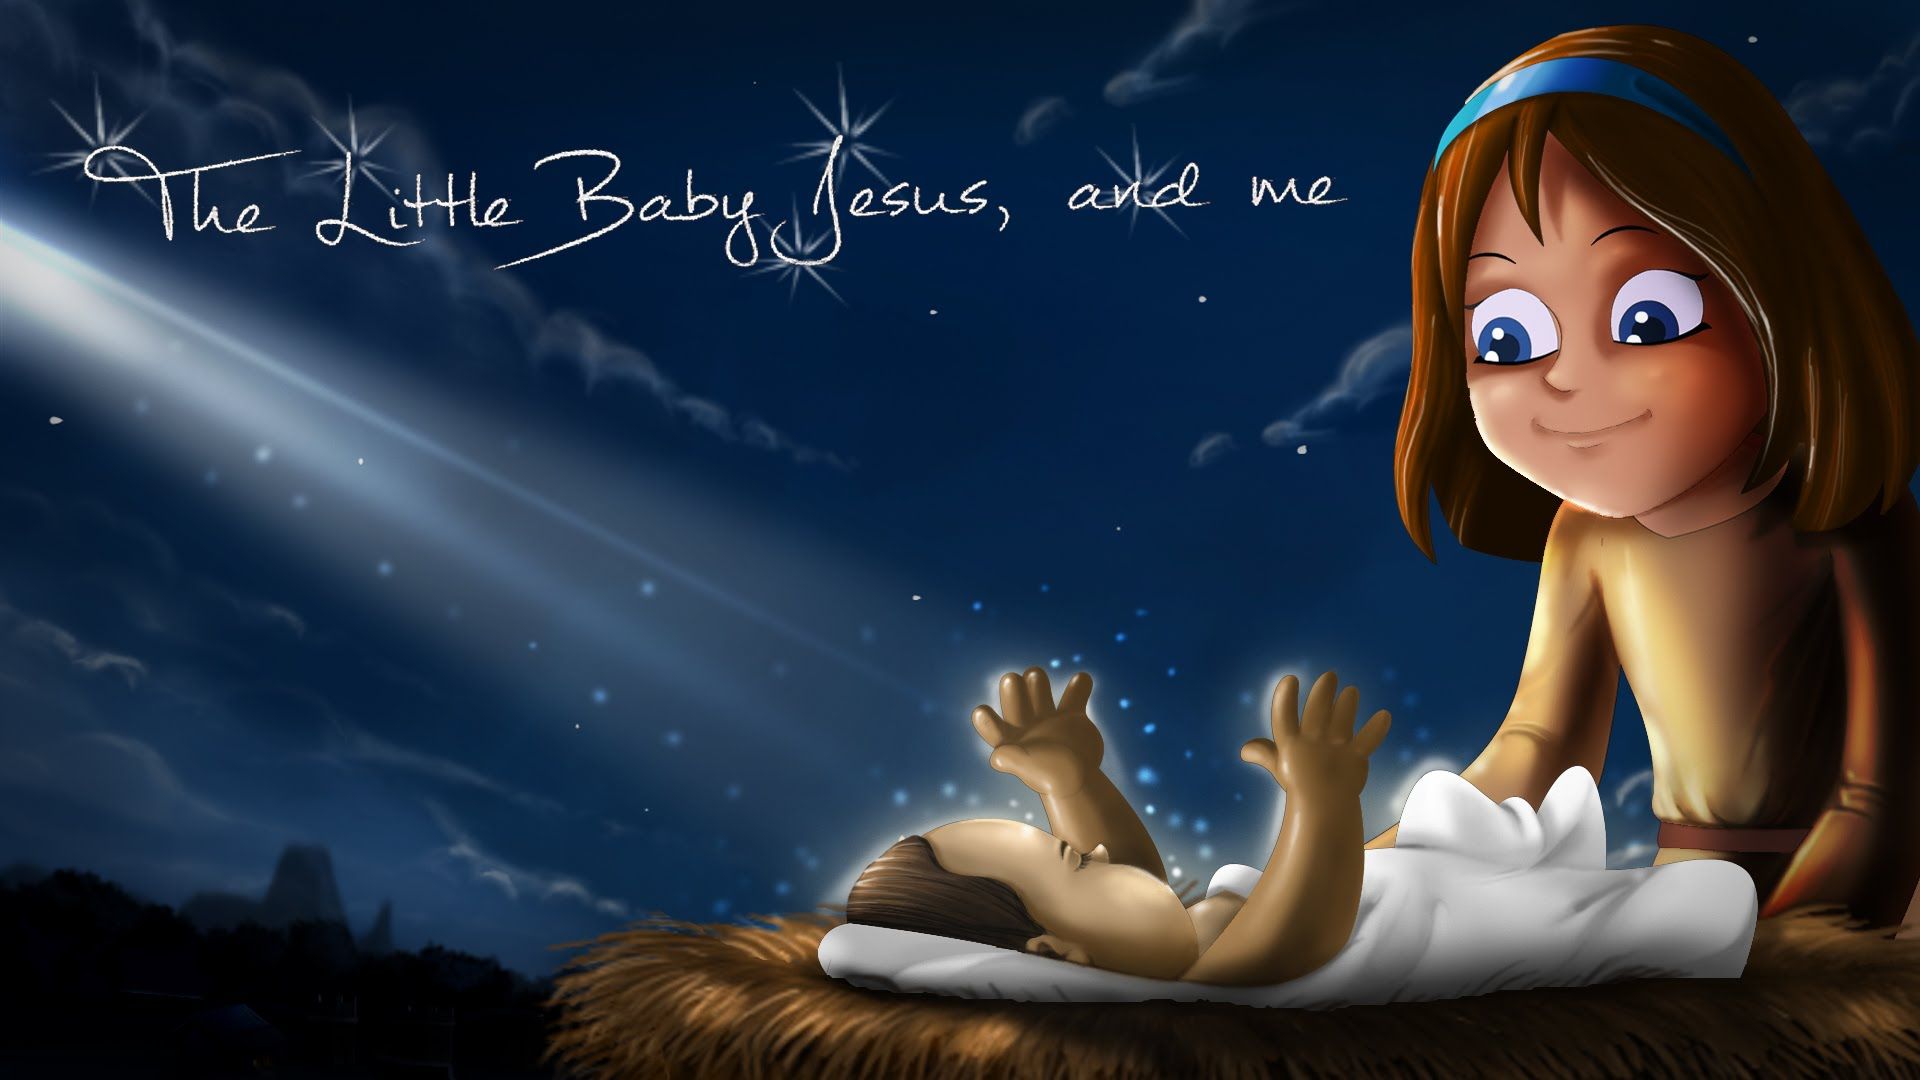 The Little Baby Jesus, and me - YouTube